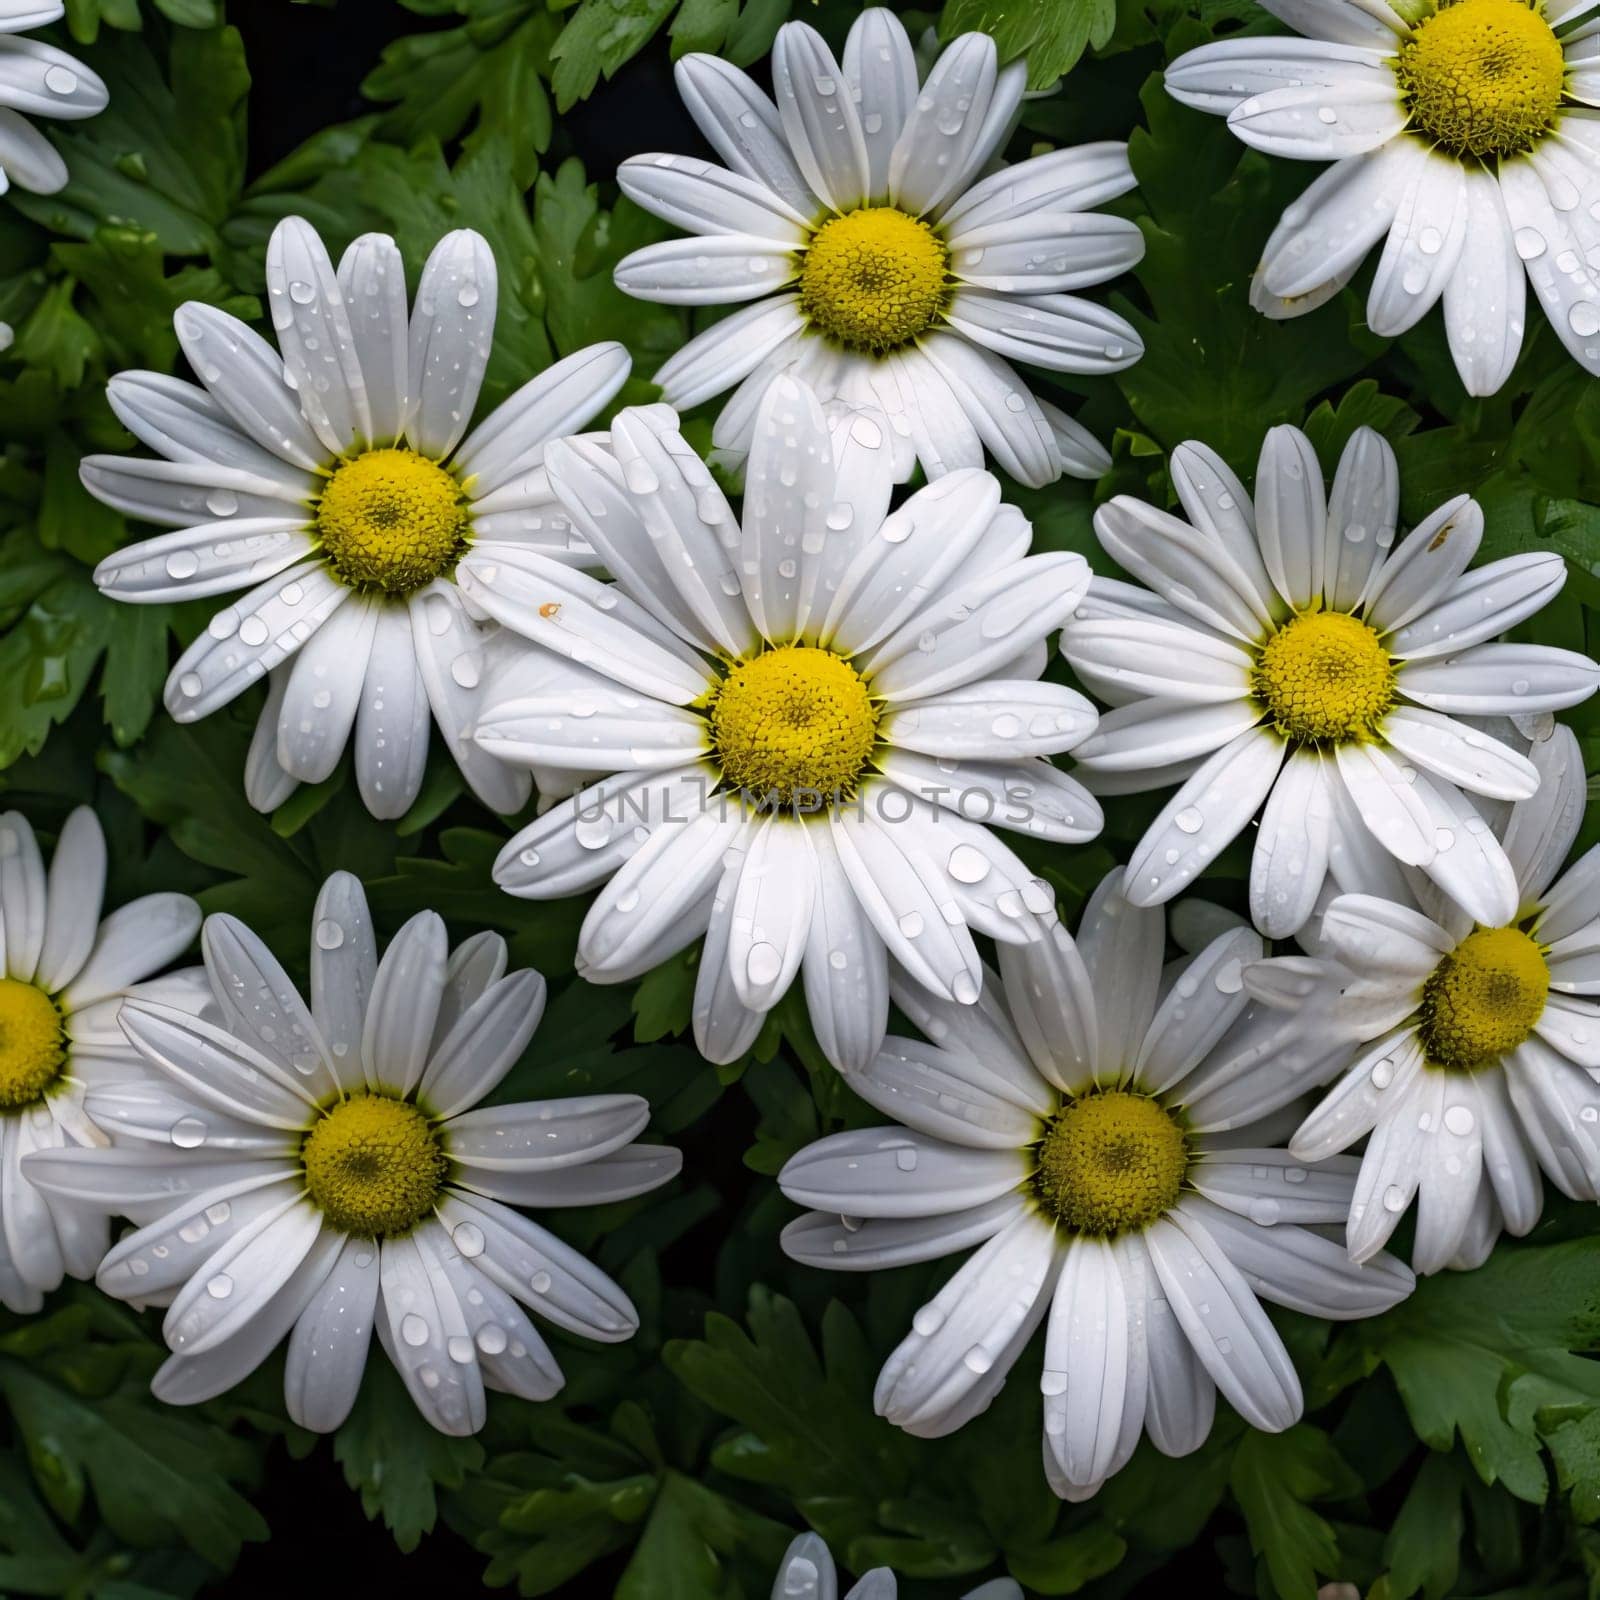 White daisies with green leaves in a field, close-up view. Drops of dew, rain, water on the petals. Flowering flowers, a symbol of spring, new life. A joyful time of nature waking up to life.